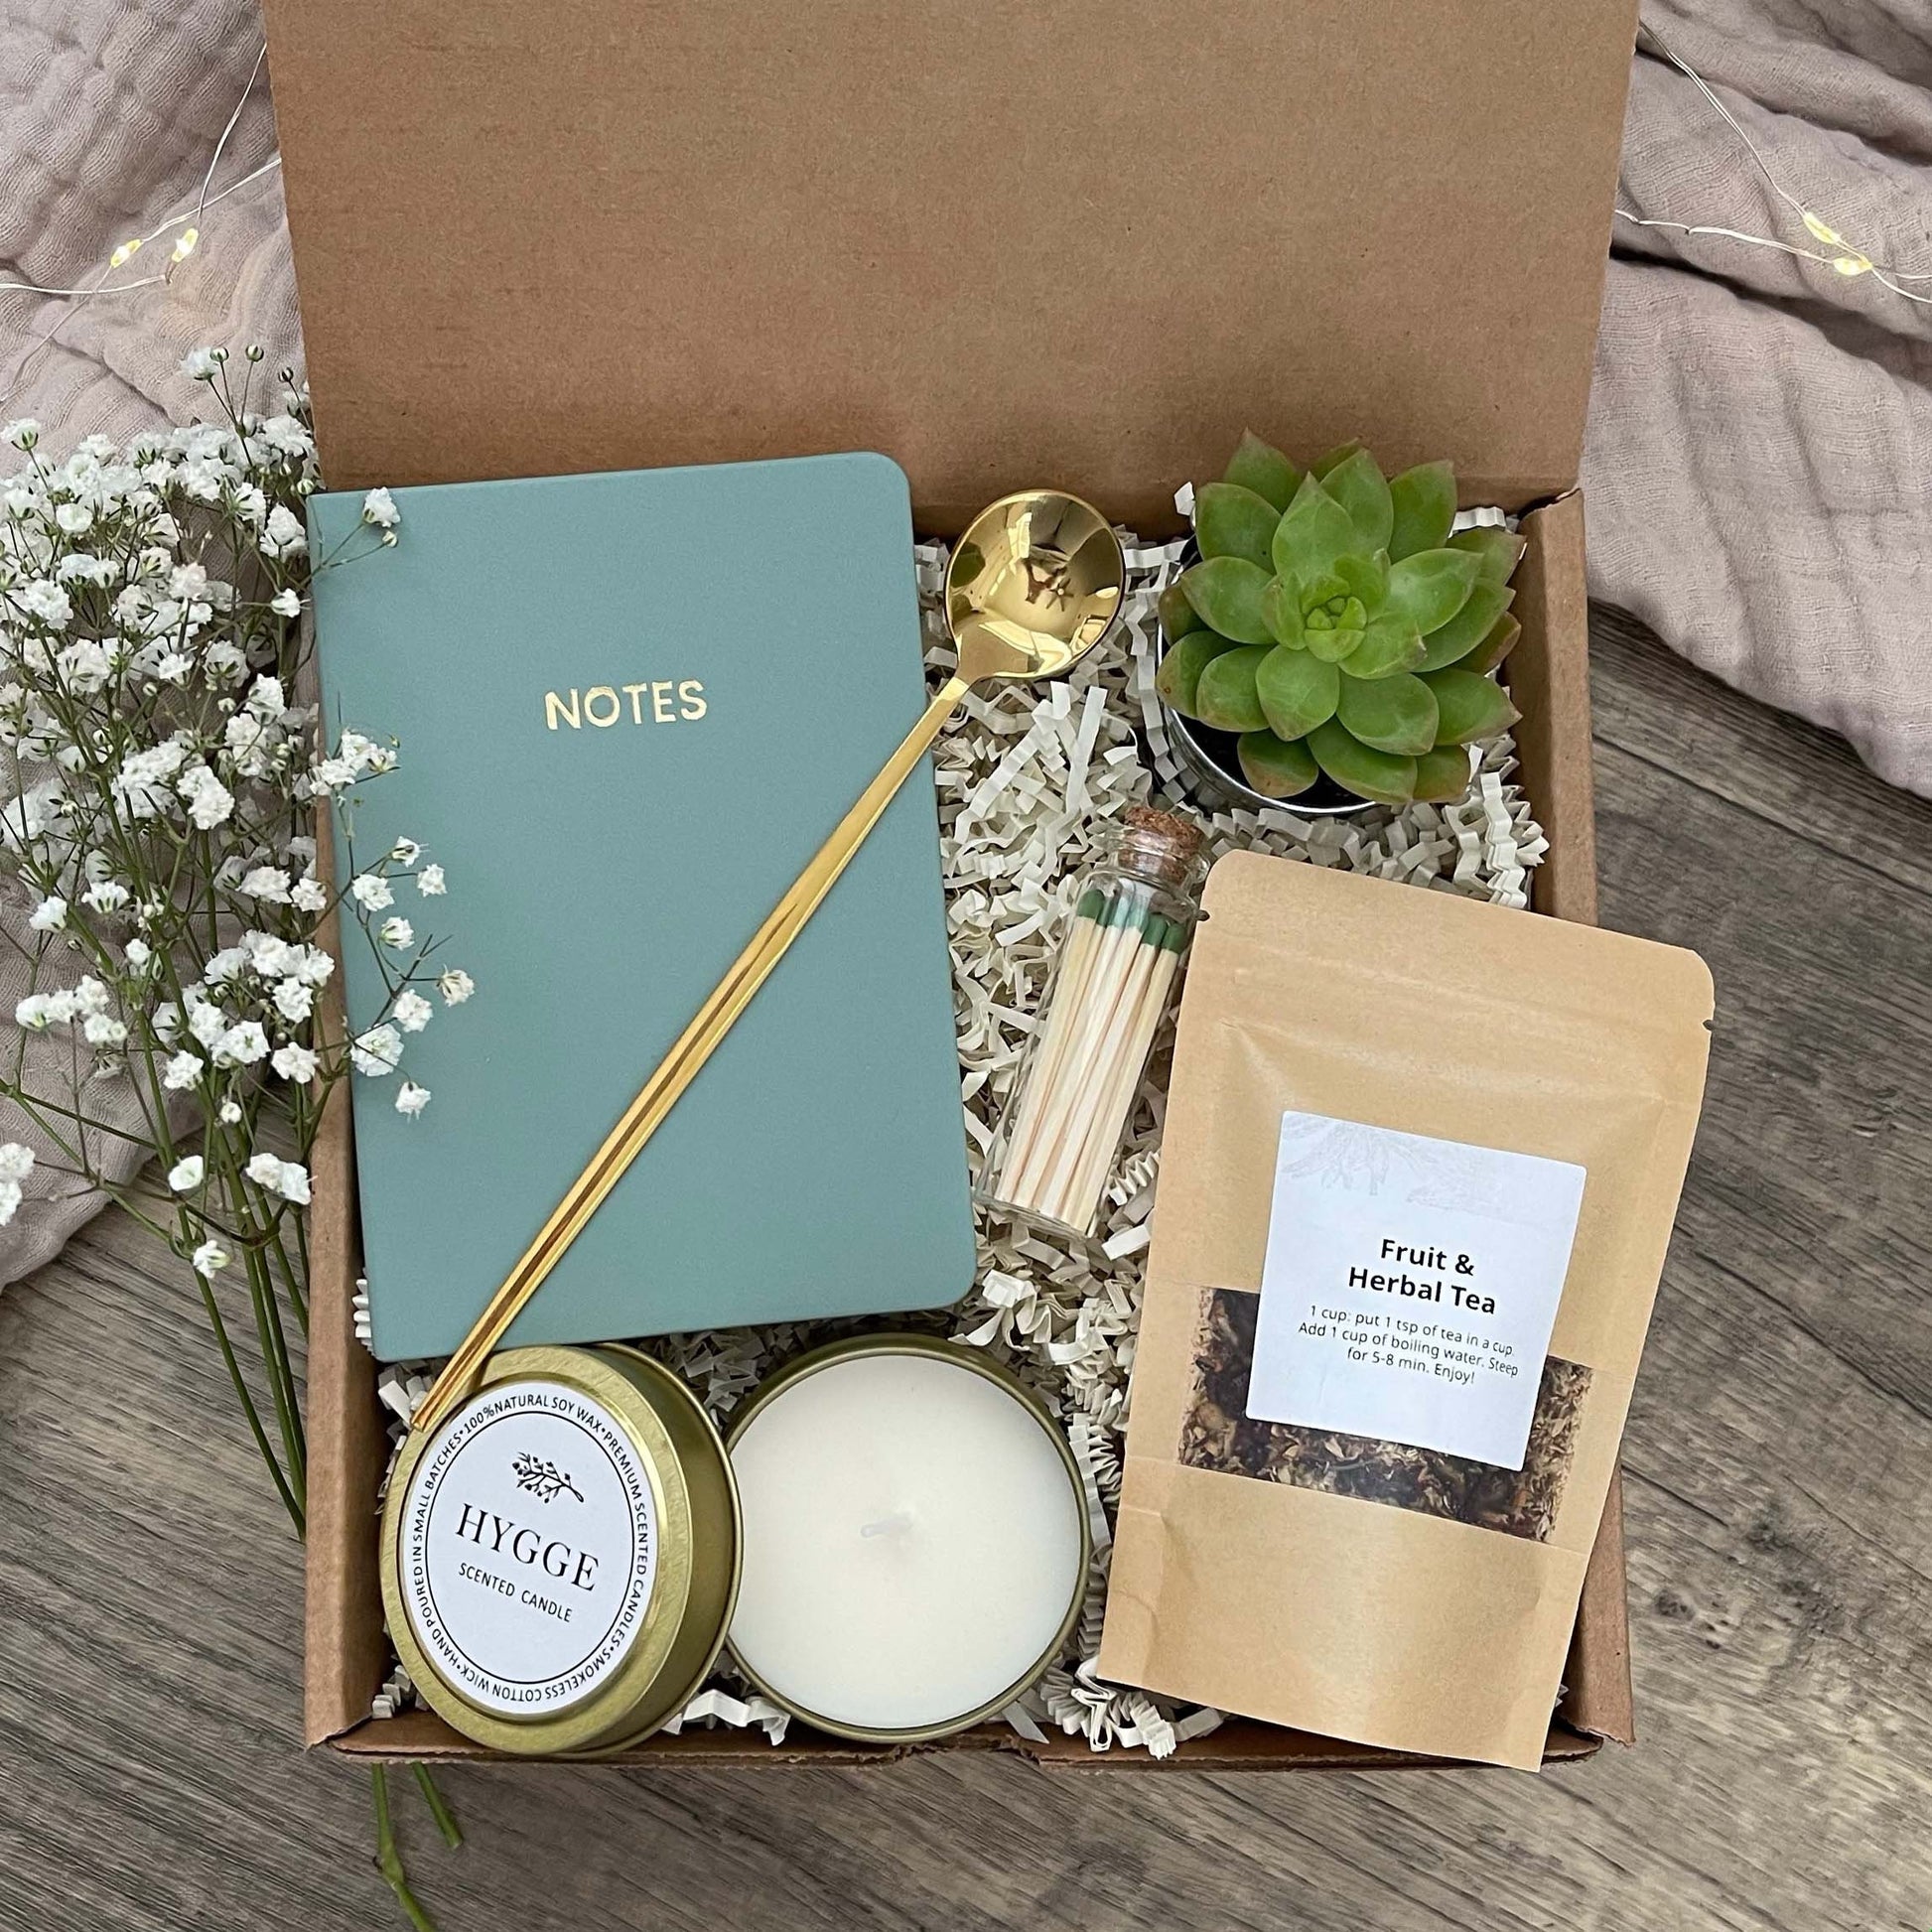 Soy candle - gift for someone who is coping with something - My